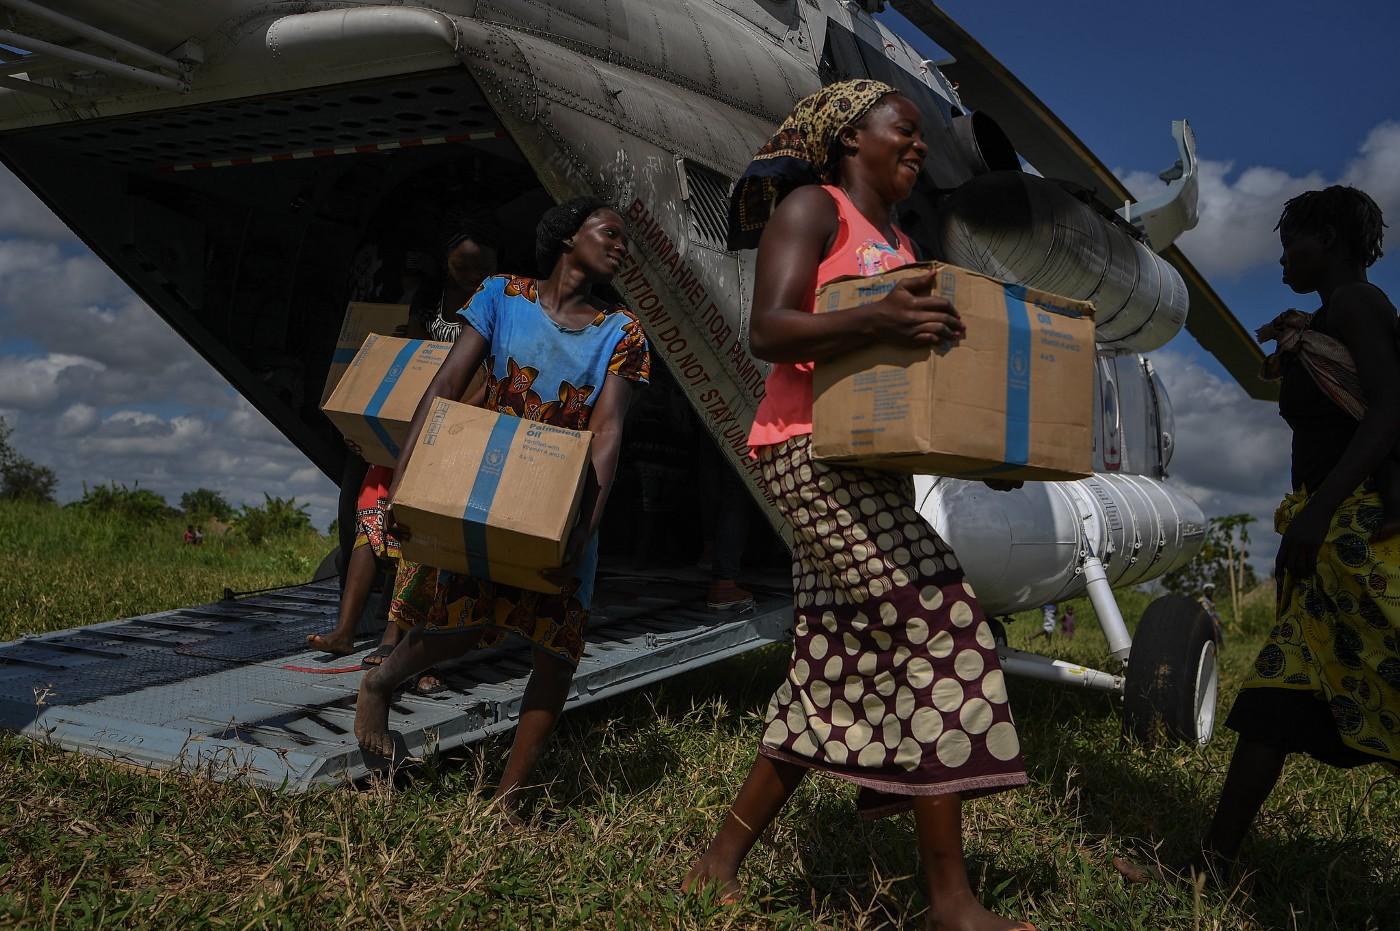 Women in Mozambique offloading boxes from a helicopter